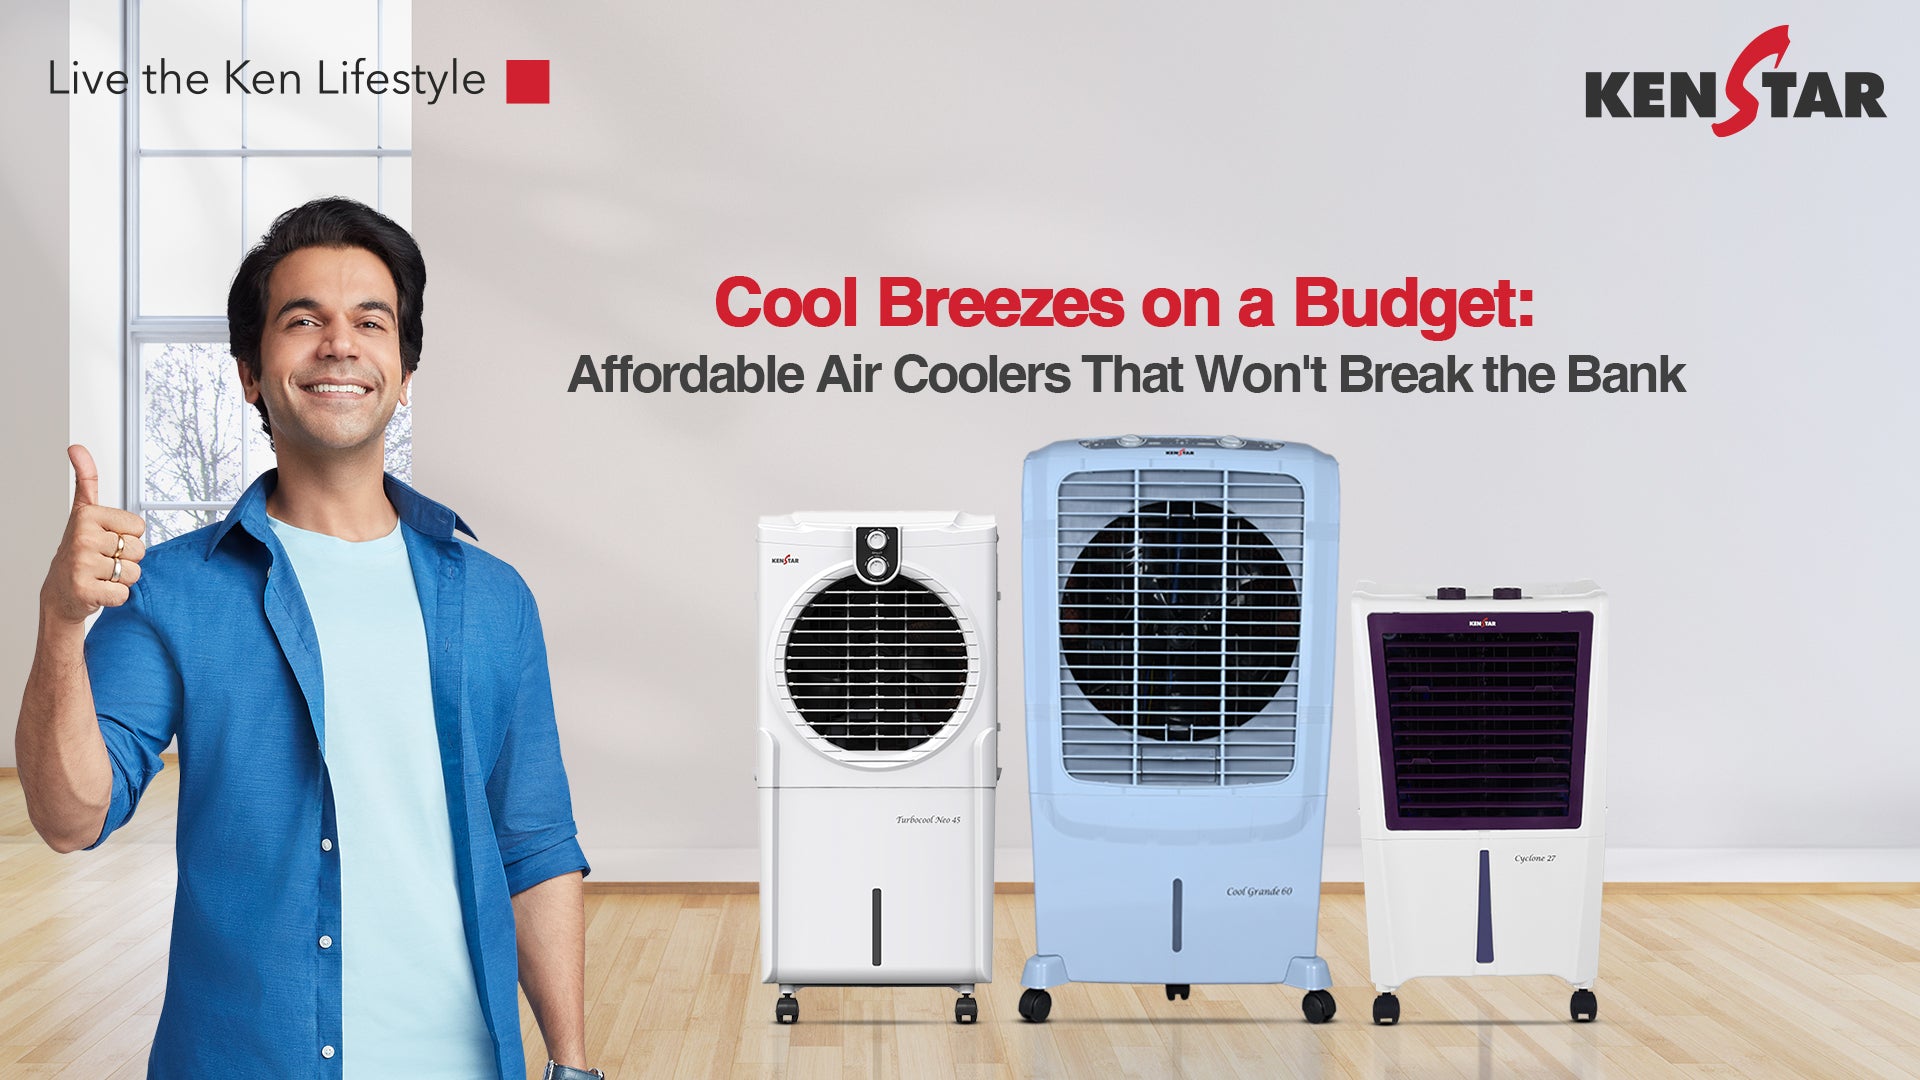 Cool Breezes on a Budget: Affordable Air Coolers That Won't Break the Bank